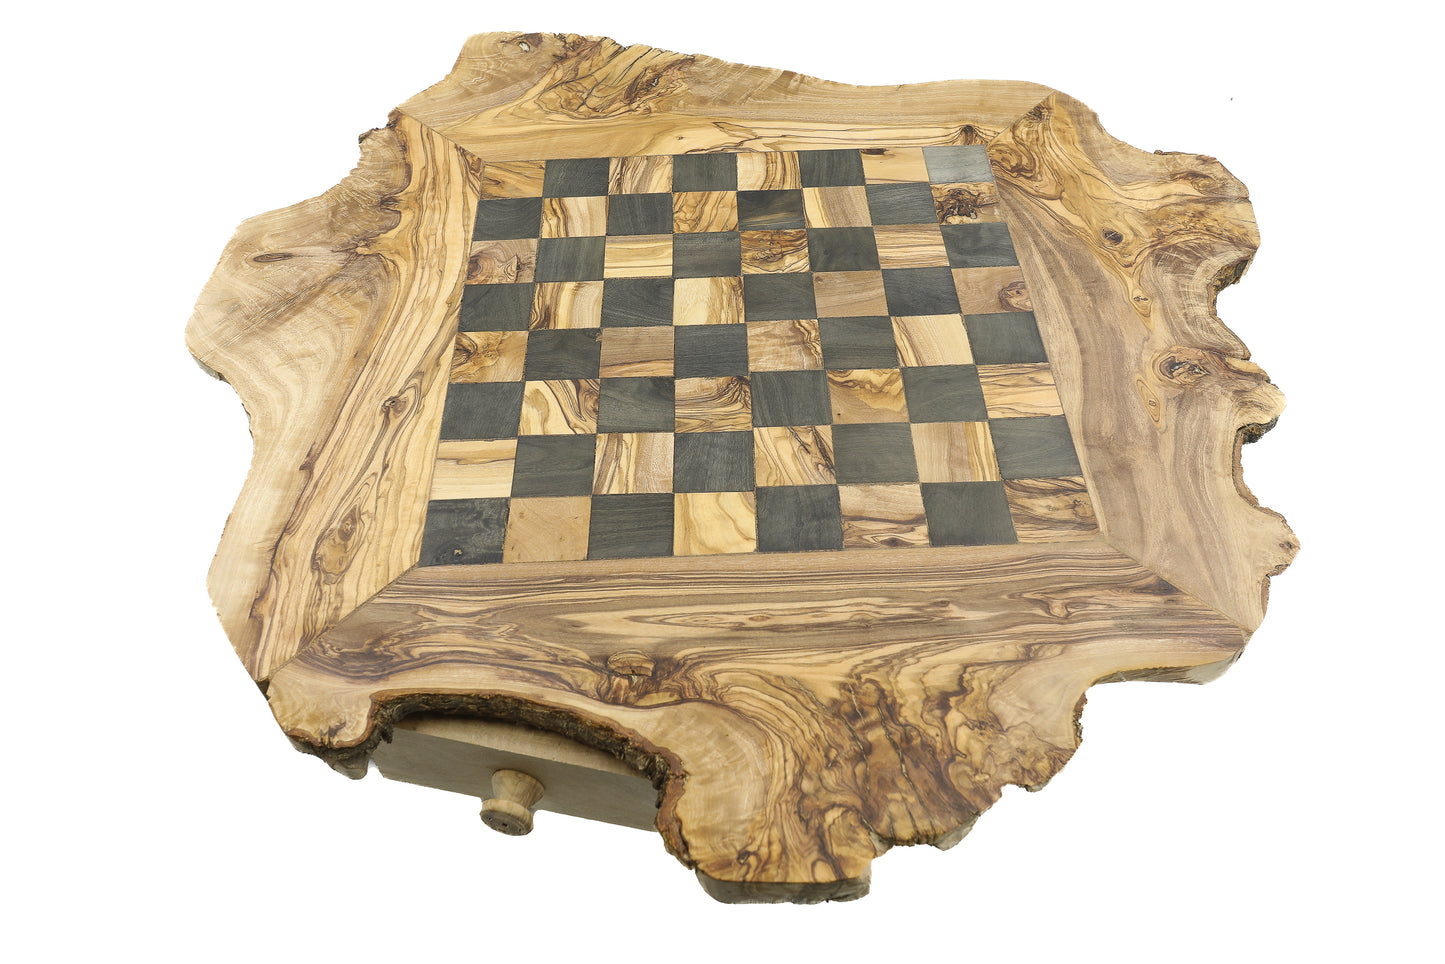 Artisan-crafted chess set with a natural olive wood board and intricately detailed pieces